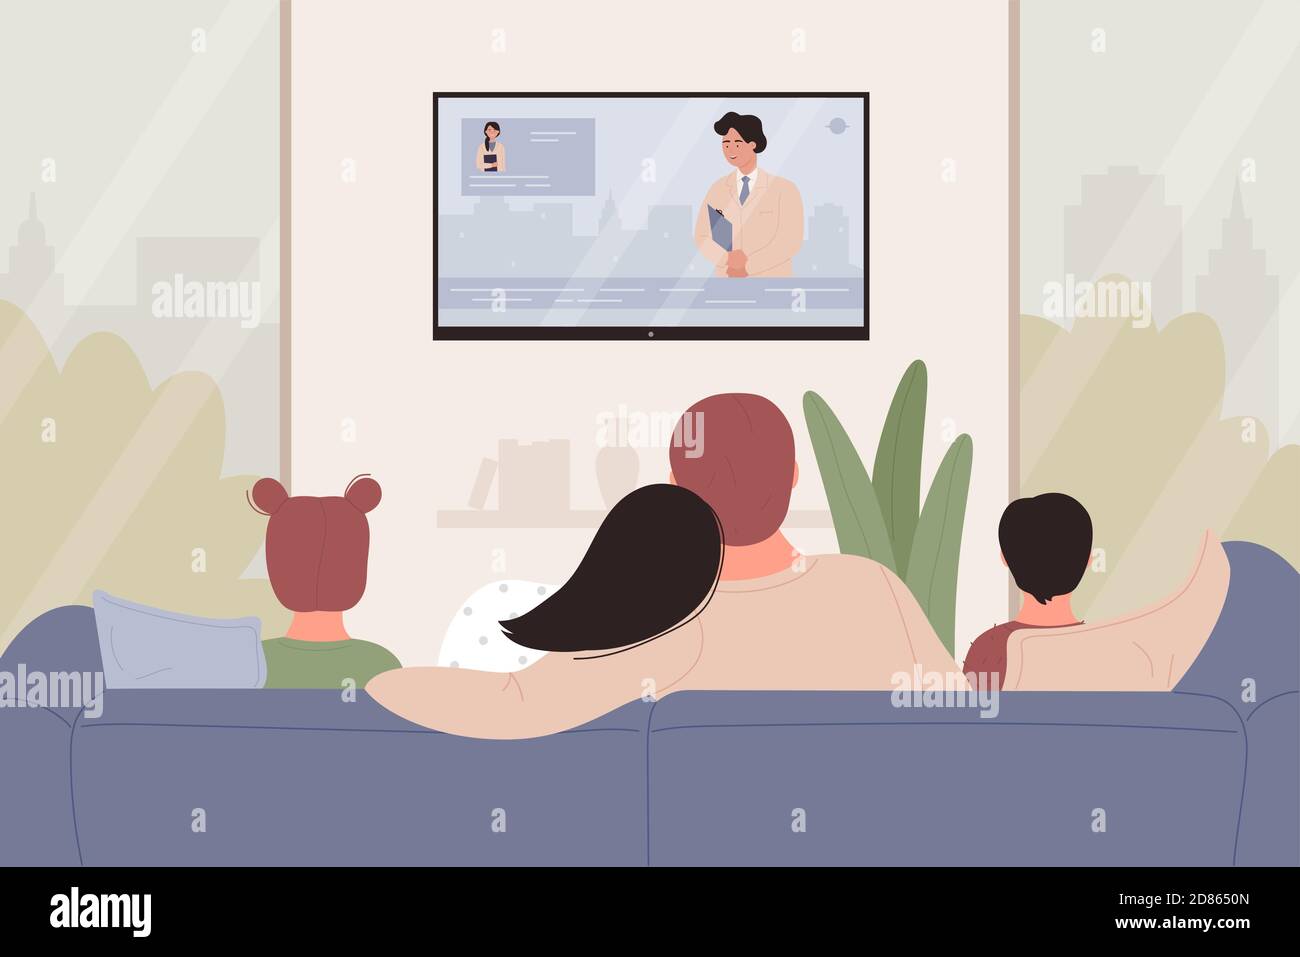 Happy family with kids sitting on sofa together and watching TV news or movie in living room vector illustration Stock Vector